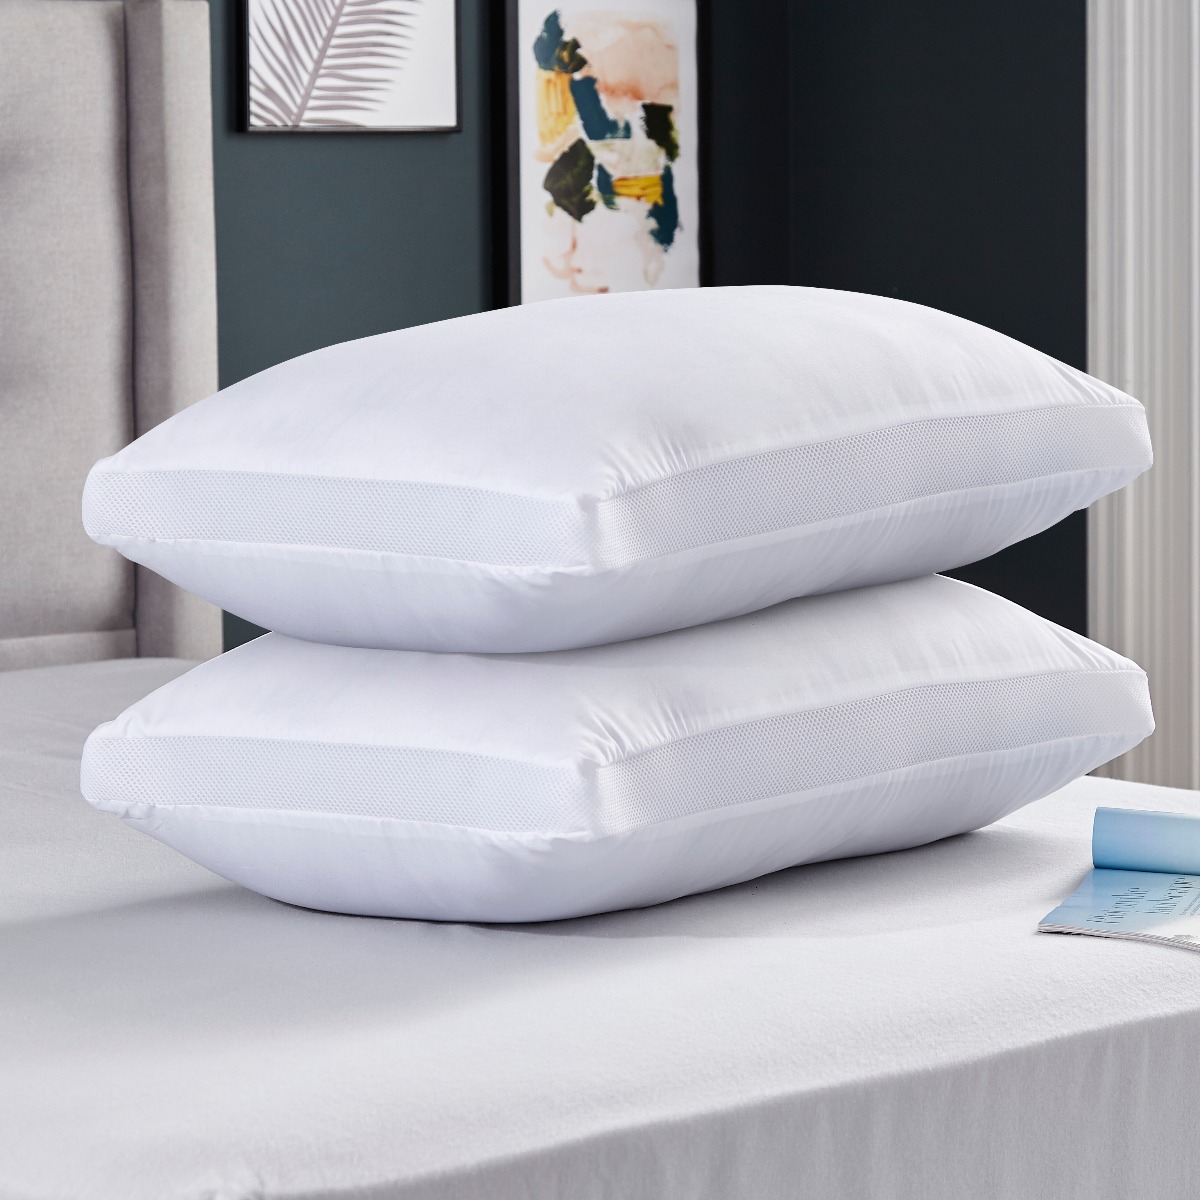 Silentnight Firm Support Pillow Pair Ideal for Side Sleepers 